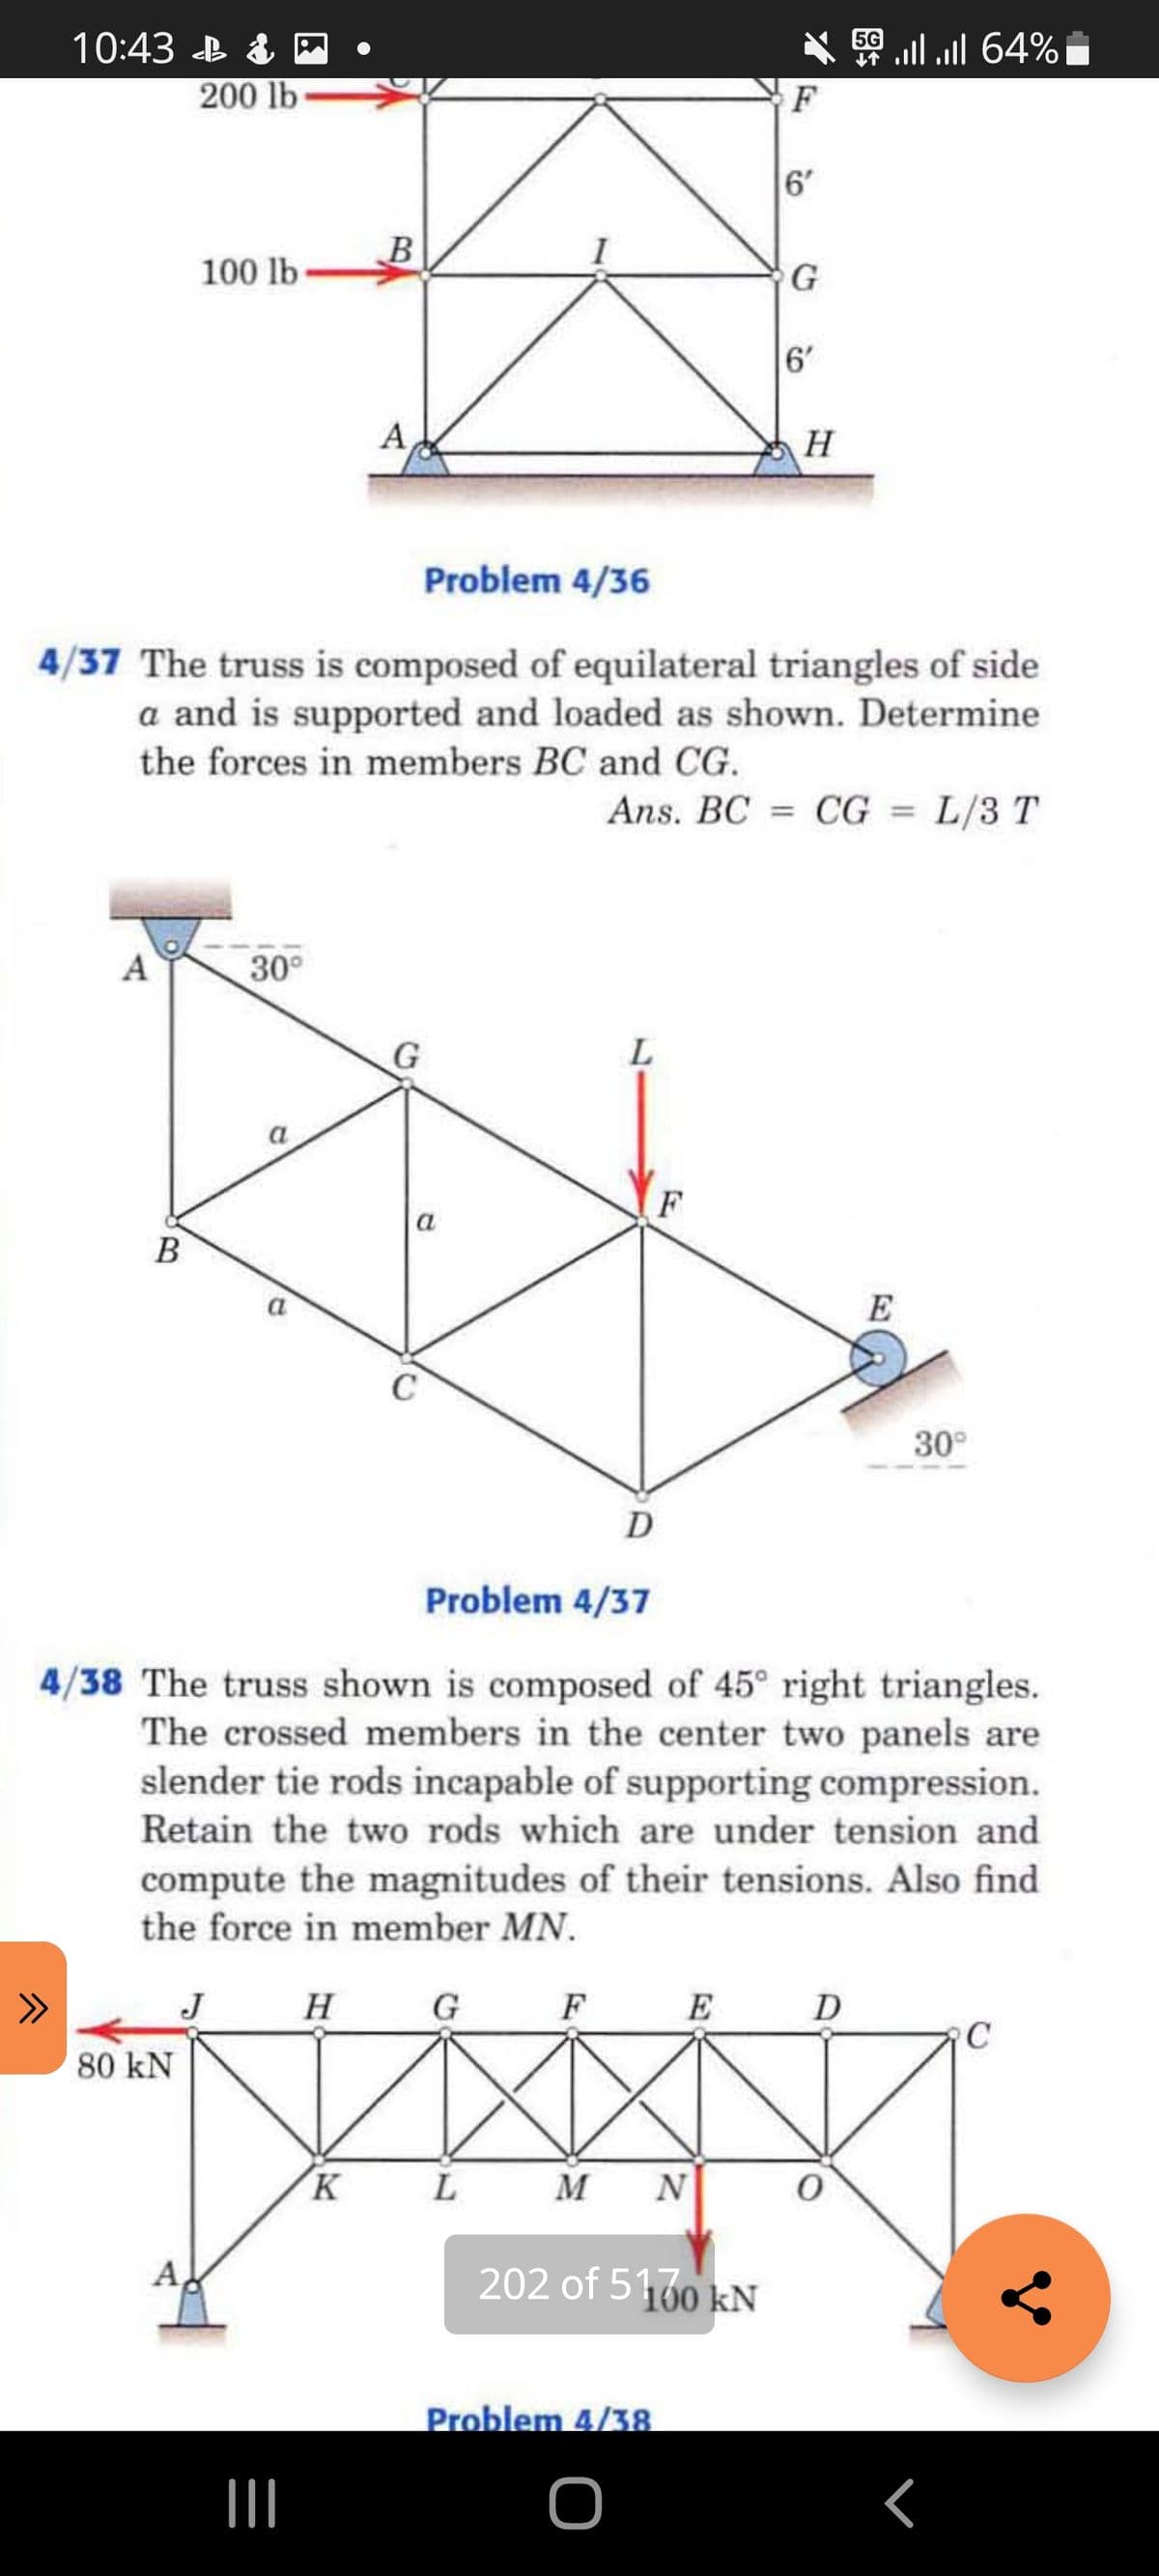 10:43 B & P
64% ו, ו.
200 lb
F
6'
B
100 lb
6'
A
H
Problem 4/36
4/37 The truss is composed of equilateral triangles of side
a and is supported and loaded as shown. Determine
the forces in members BC and CG.
Ans. BC = CG = L/3 T
%3D
%3D
A
30°
G
a
F
a
В
a
E
30°
Problem 4/37
4/38 The truss shown is composed of 45° right triangles.
The crossed members in the center two panels are
slender tie rods incapable of supporting compression.
Retain the two rods which are under tension and
compute the magnitudes of their tensions. Also find
the force in member MN.
>>
J
H G
F
E
D
80 kN
L
M
N
202 of 5160 kN
Problem 4/38
